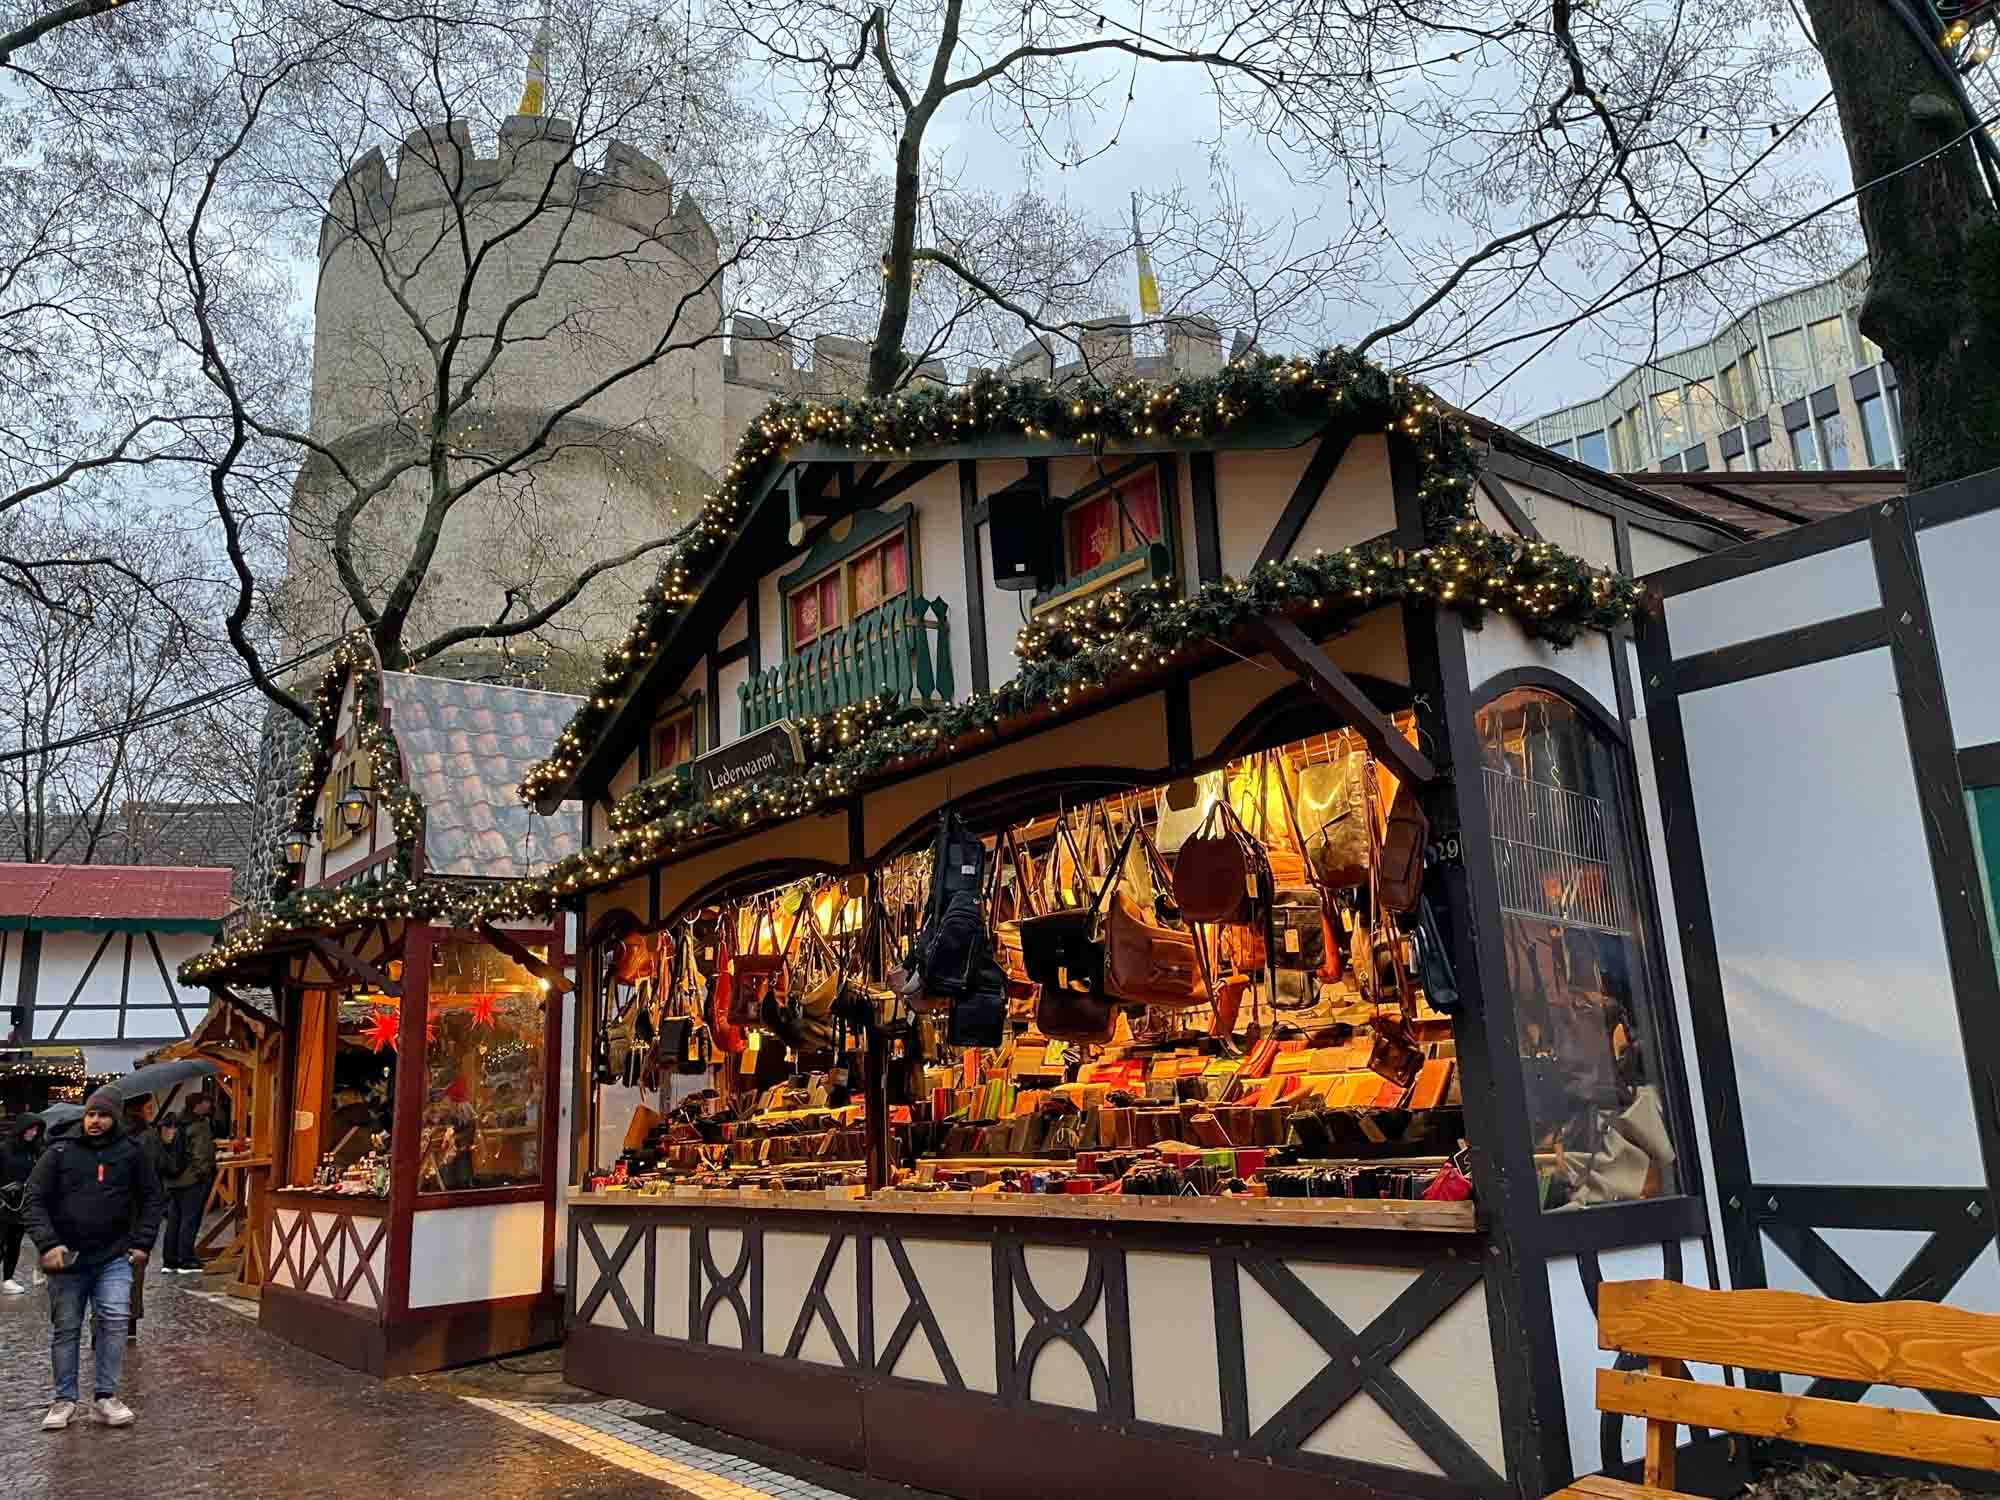 Half-timbered stall at a Christmas market with a large city gate in the background